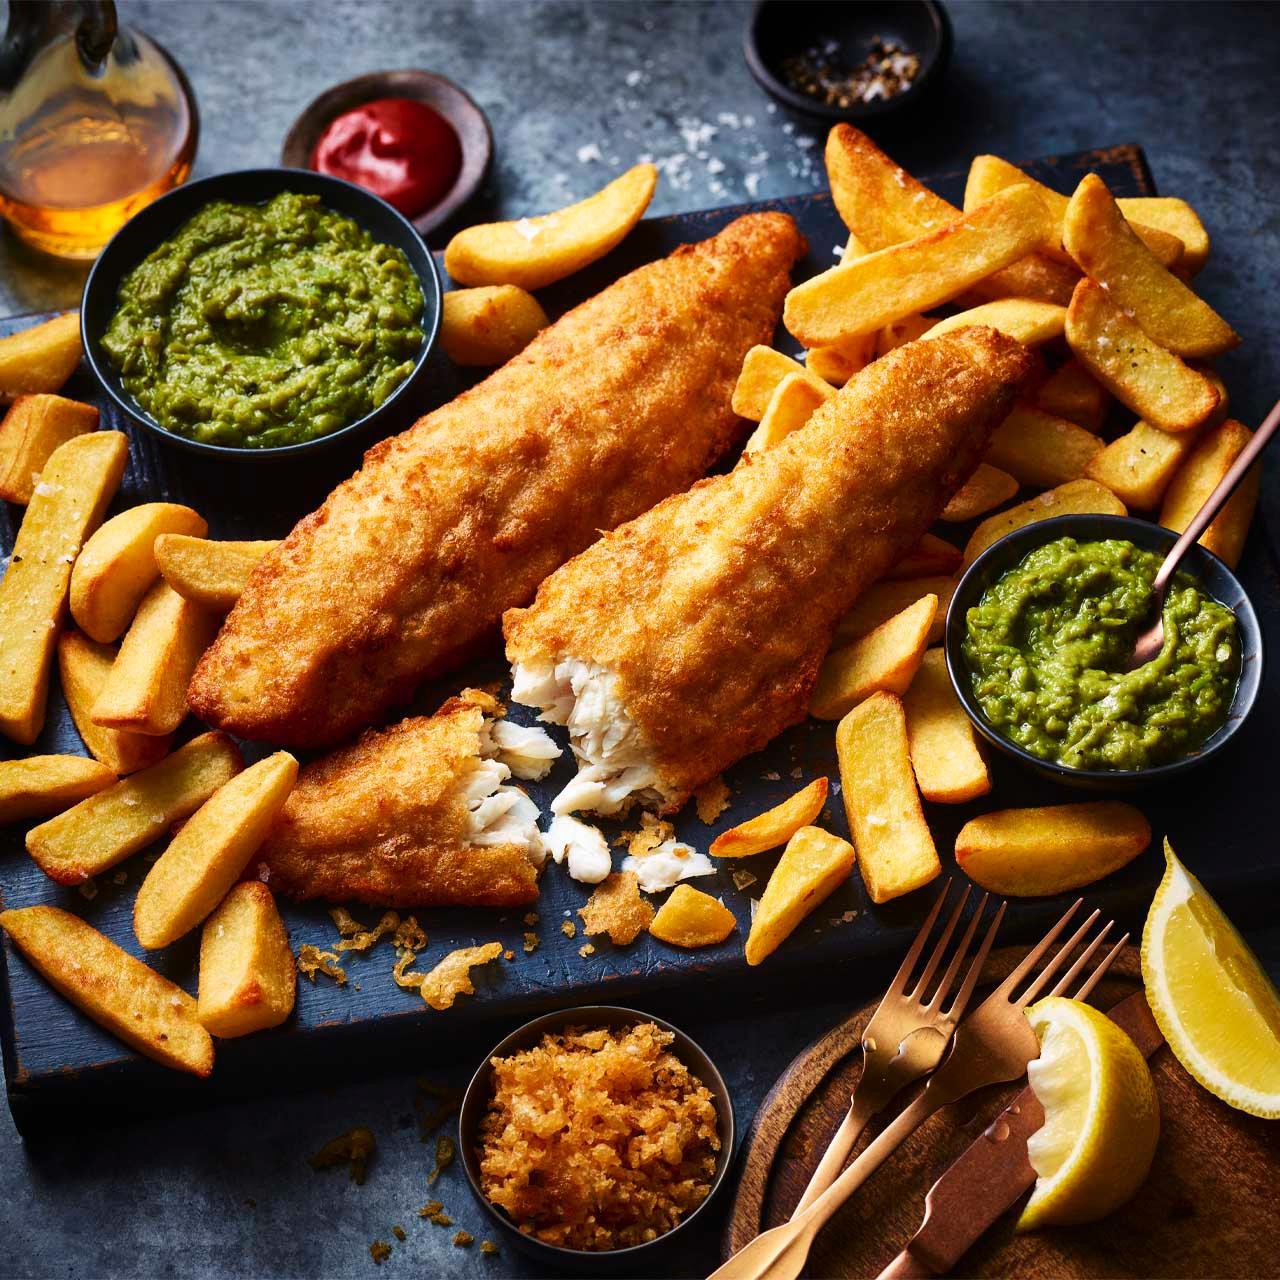 M&S Gastropub Fish & Chips for Two 1020g